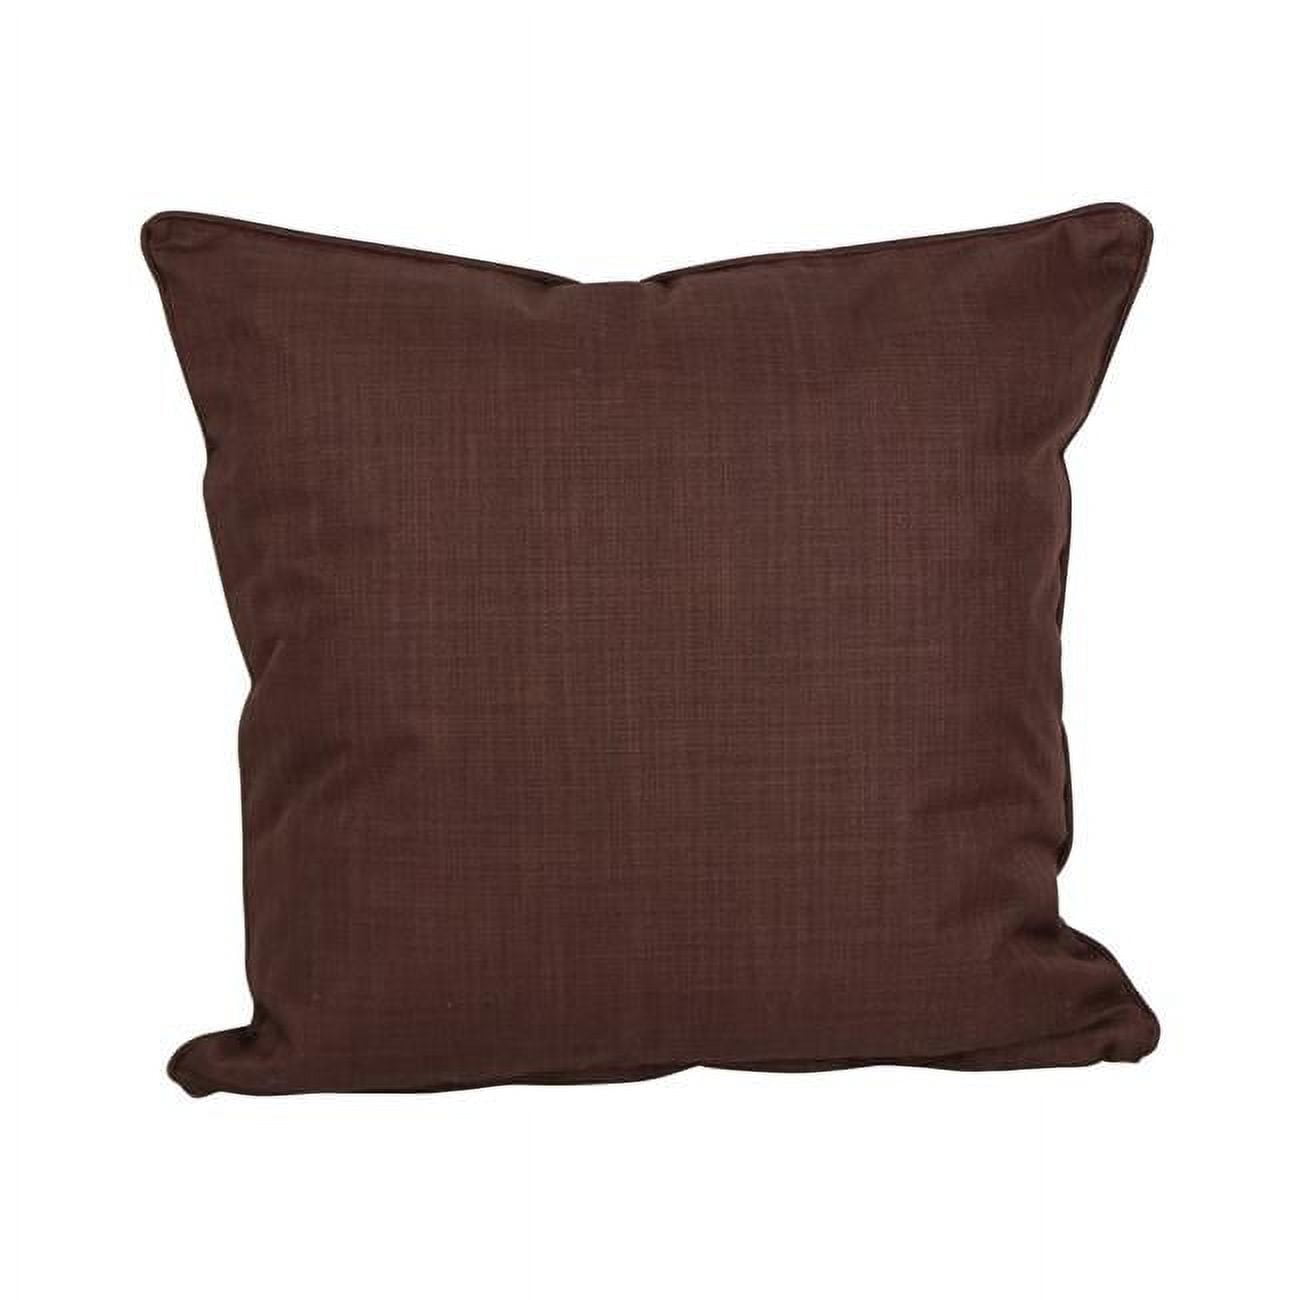 Picture of Blazing Needles 9813-CD-S1-REO-SOL-10 25 in. Double-Corded Spun Polyester Square Floor Pillow with Insert, Cocoa